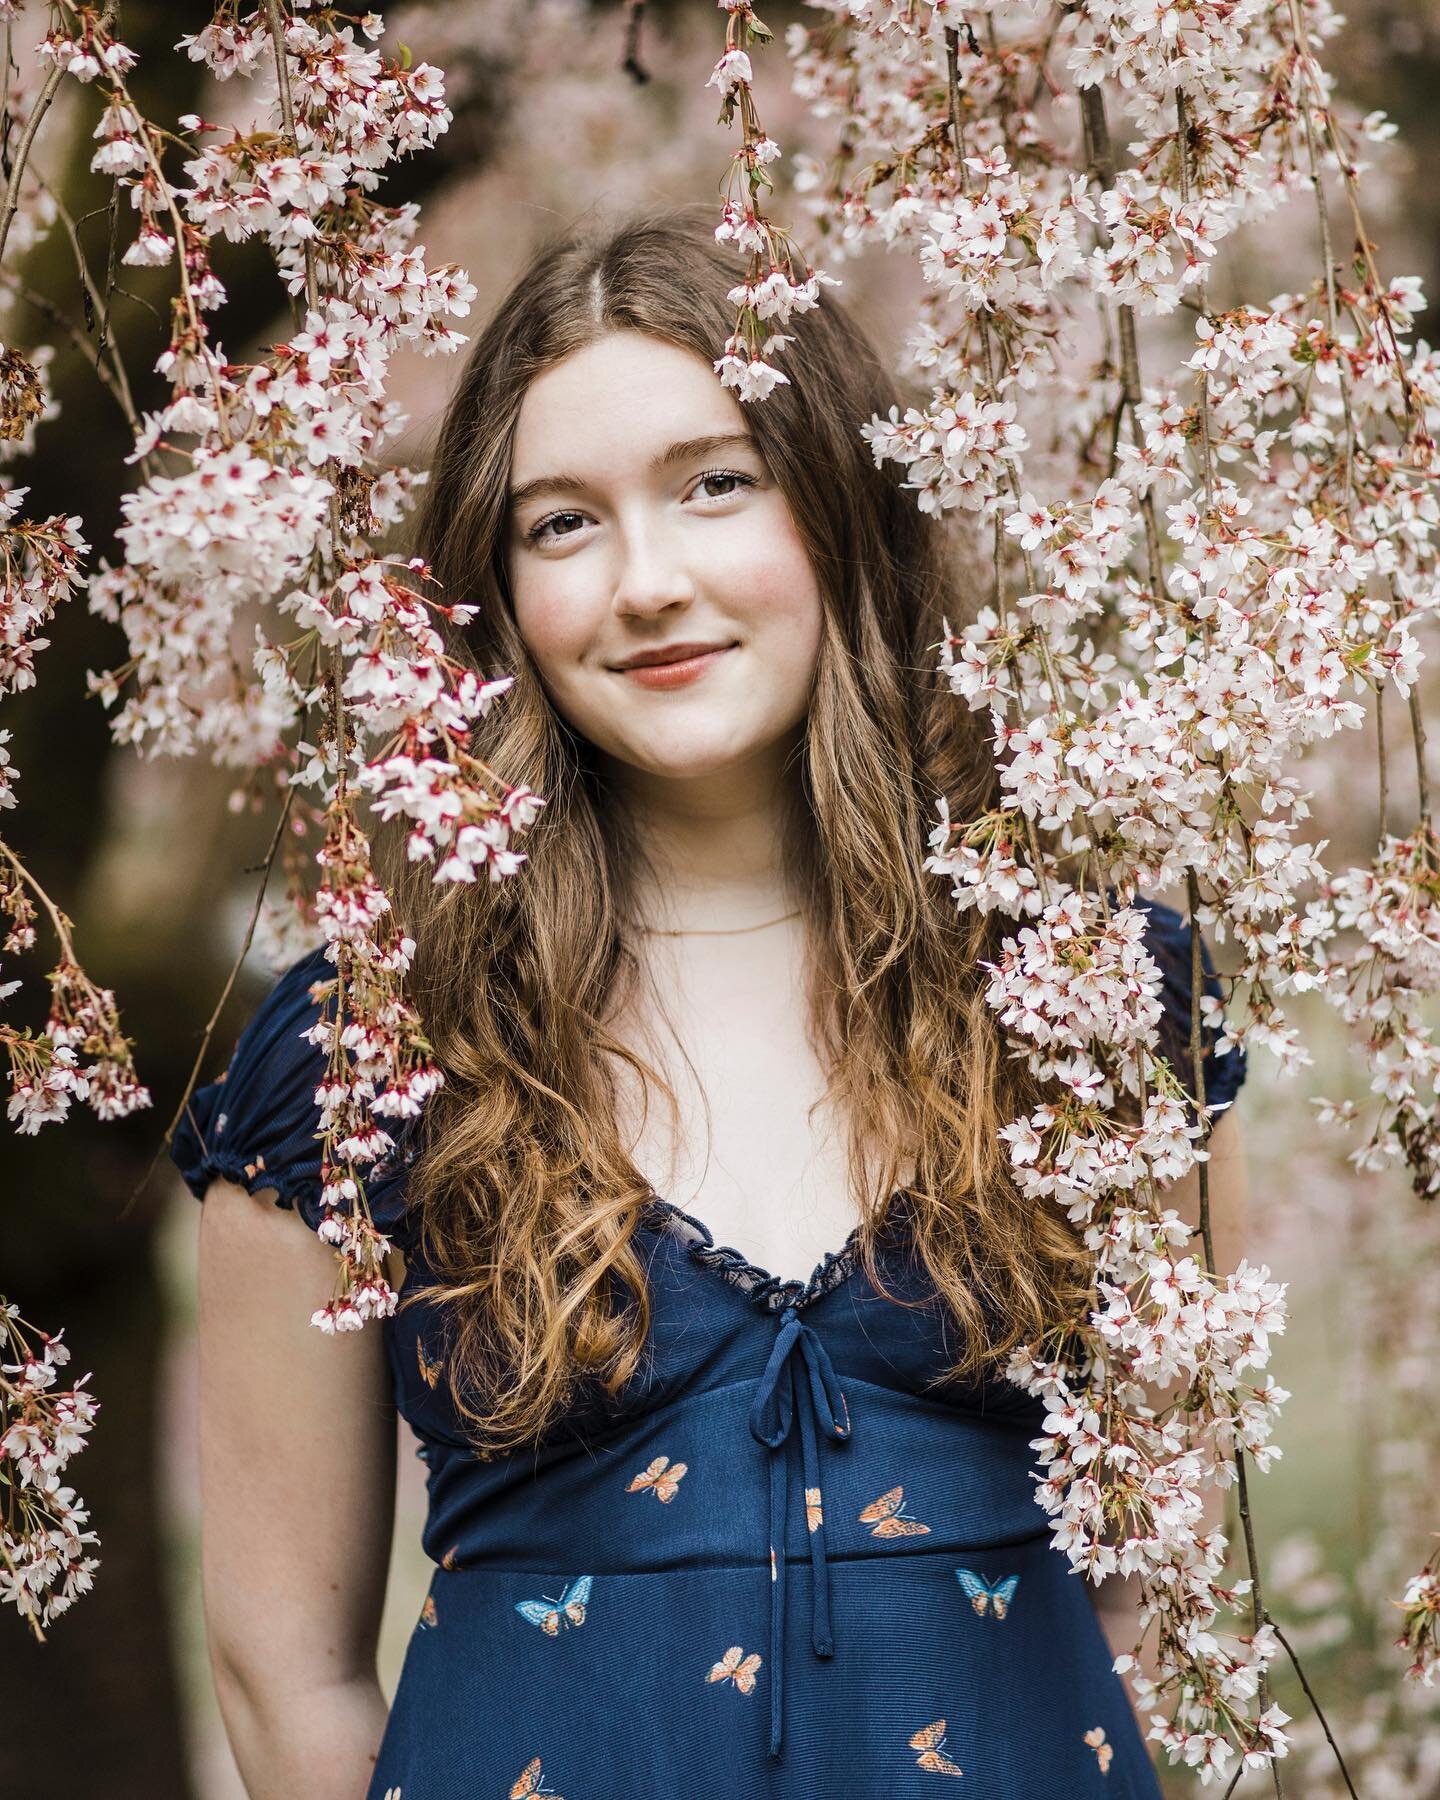 Got to spend some time in the arboretum with this beauty. Can&rsquo;t believe Amelia will be graduating this year! #cherryblossom #seattleseniorphotographer